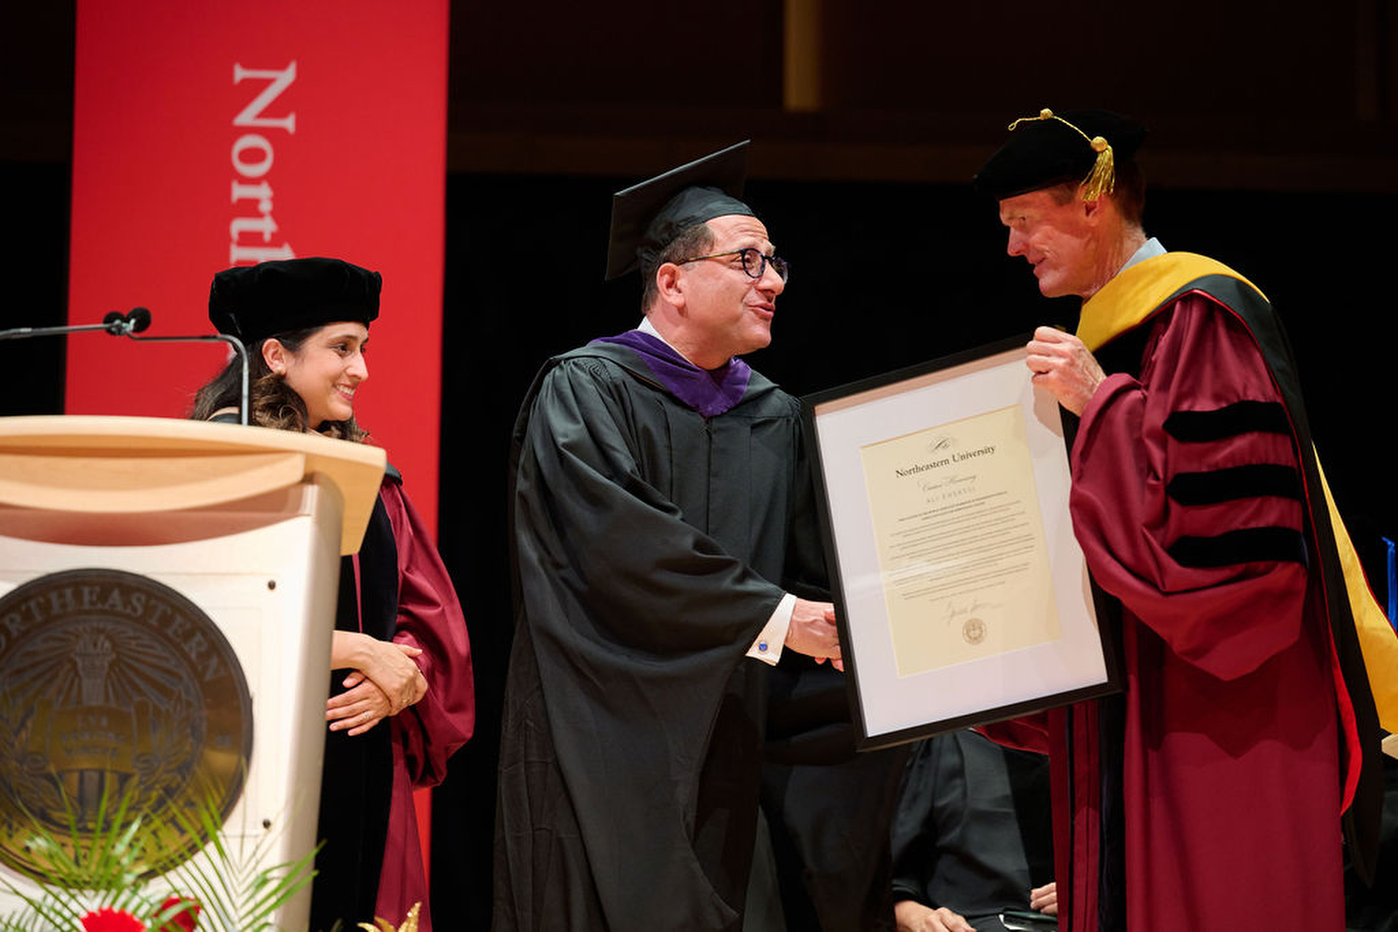 A speaker receives an award at Northeastern's Toronto convocation.